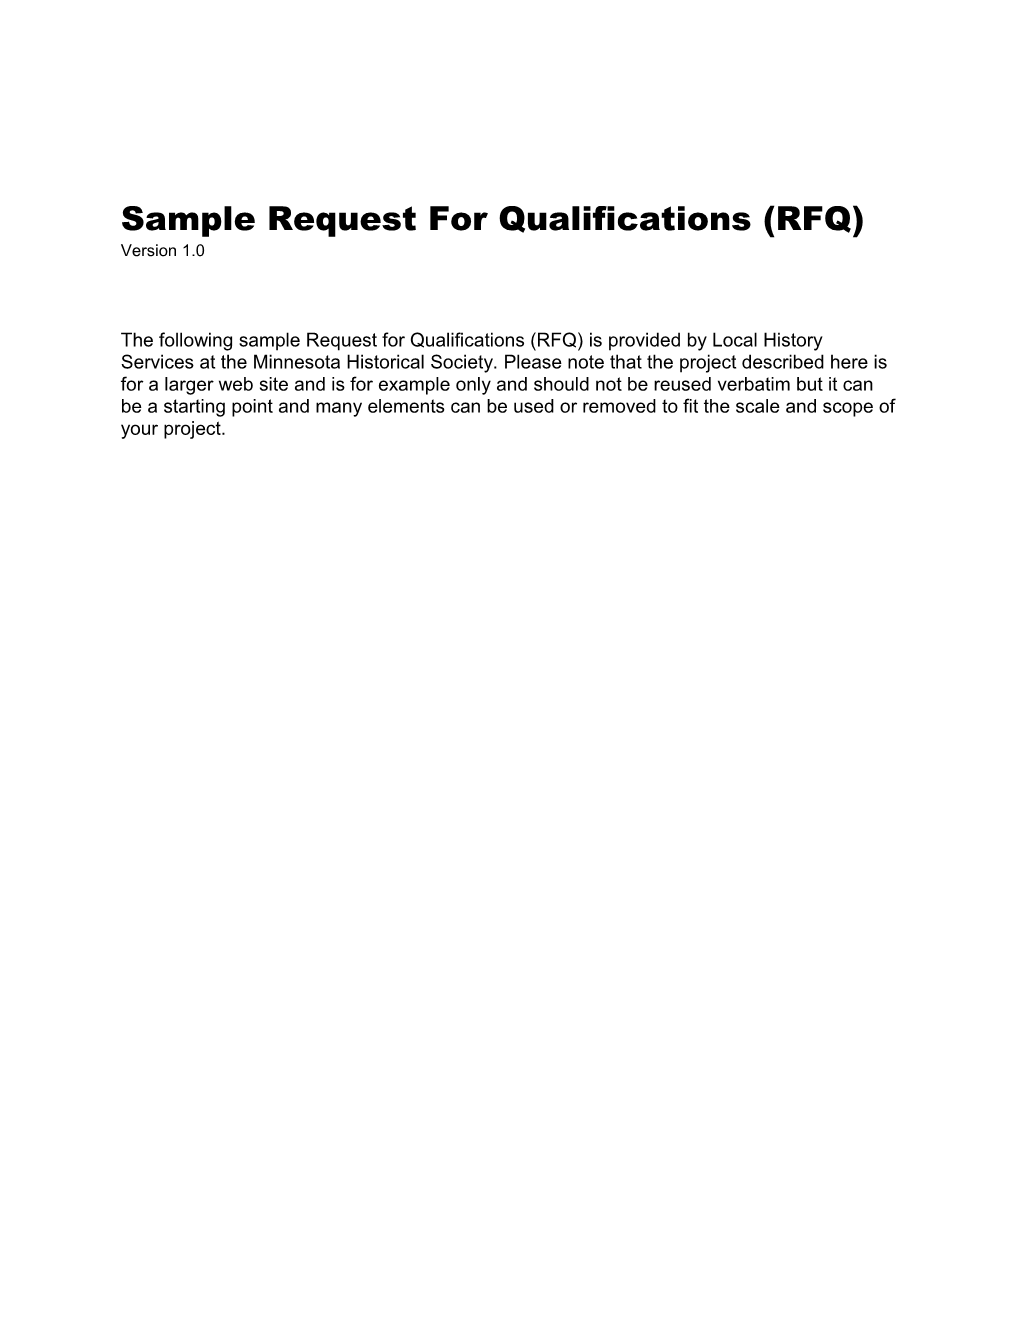 SUBJECT: Acme Historical Society Request for Qualifications (RFQ) Website Design